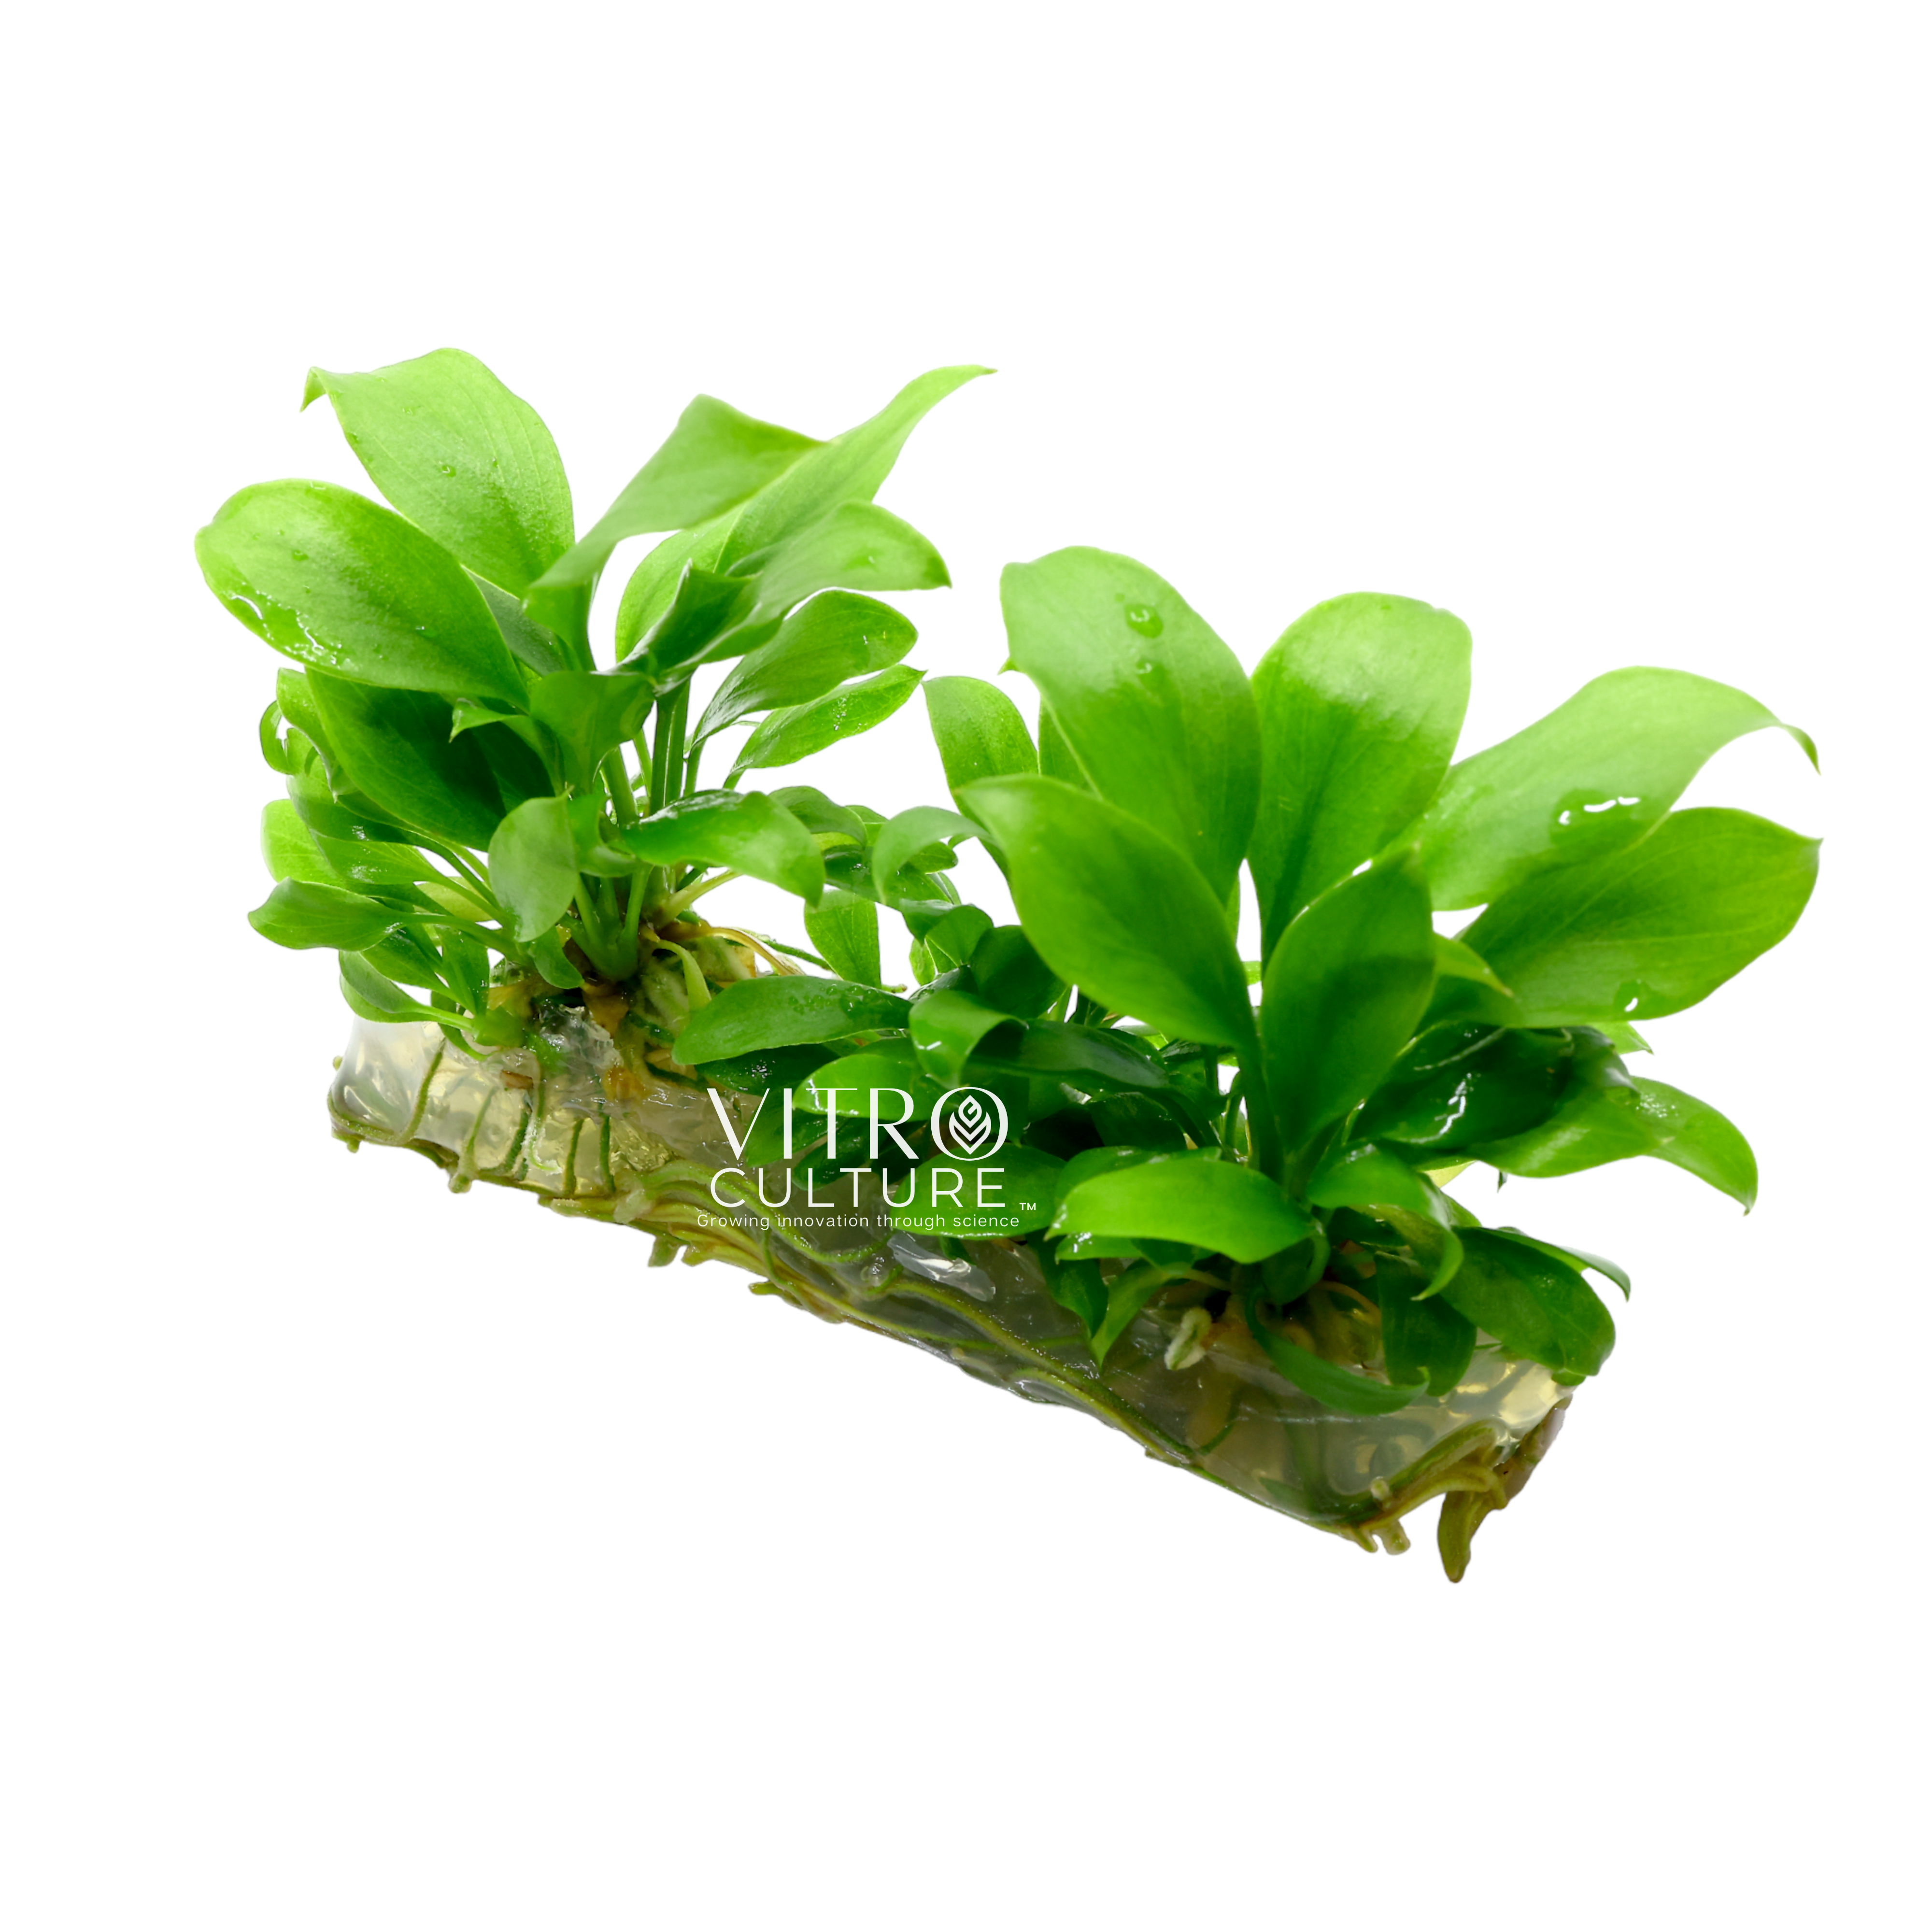 Anubias gilletii is a slow-growing plant that can thrive in low to medium light conditions. It is also tolerant of a wide range of water parameters, including pH and hardness, which makes it an adaptable choice for a variety of aquarium setups.